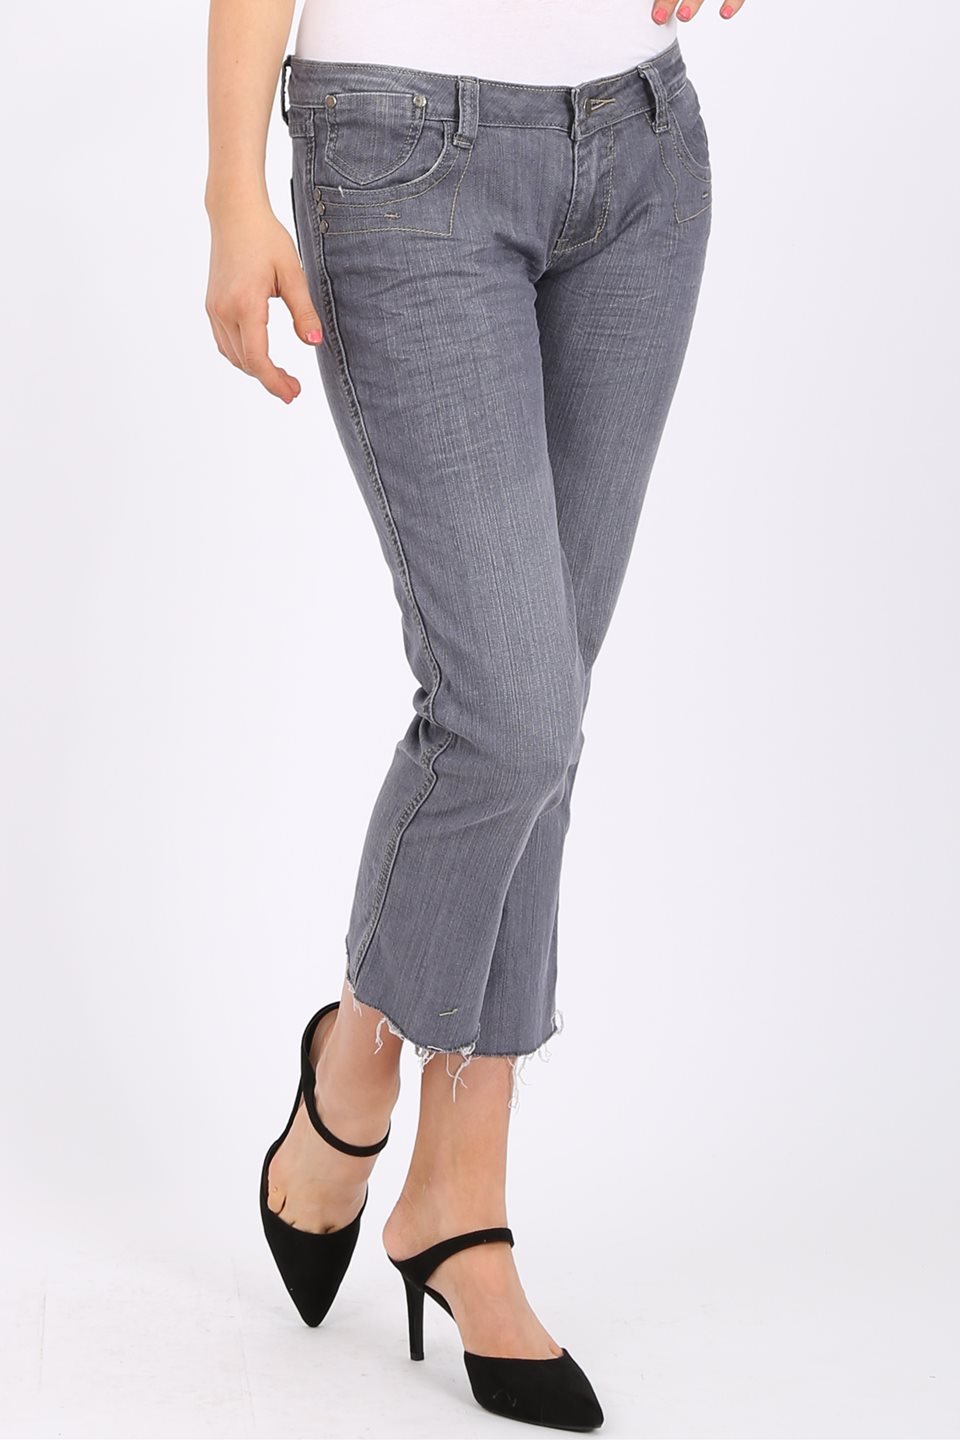 MISS PINKI River cropped jeans in grey